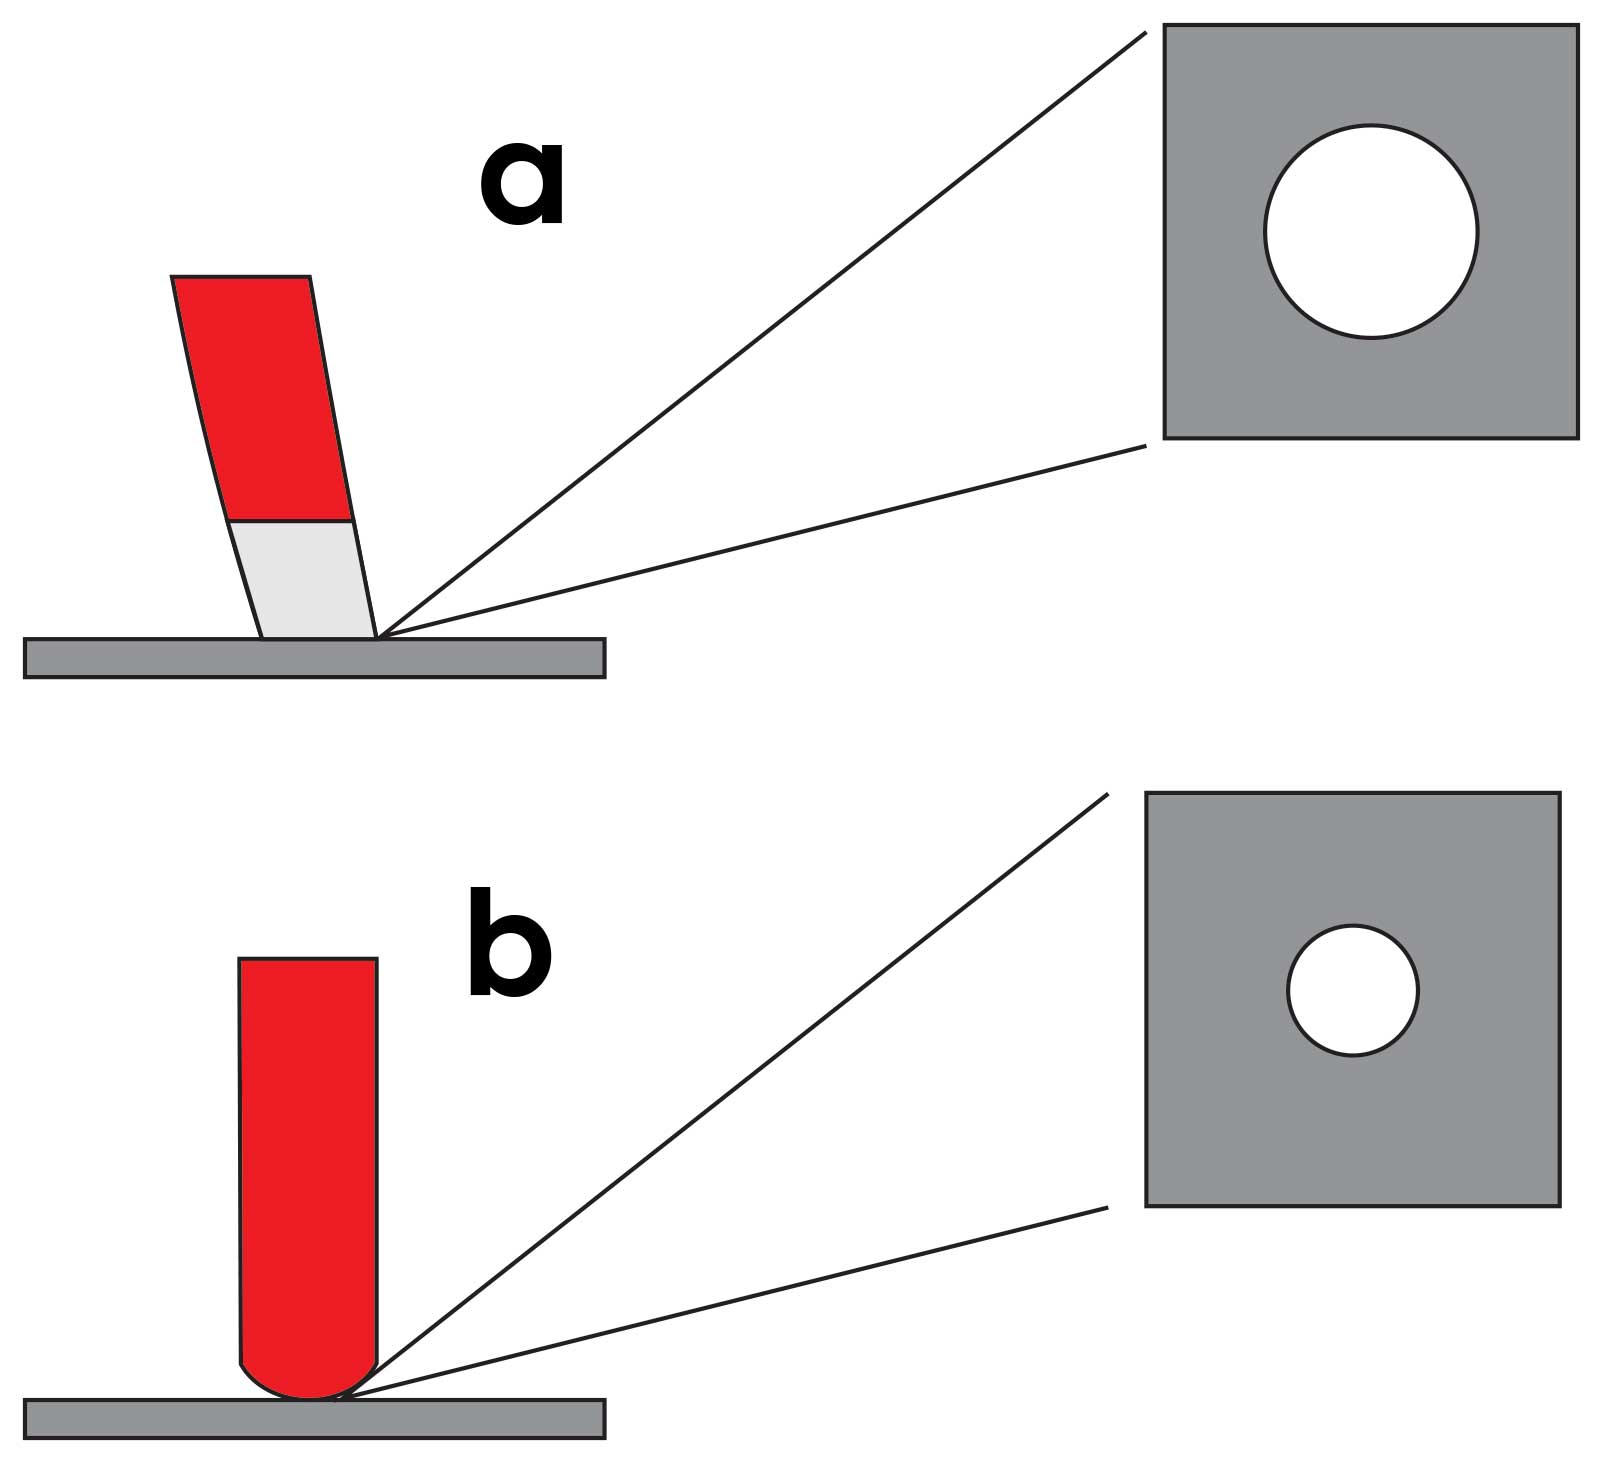 The difference between a flat-ended and spherical magnet when measureing the area of a surface